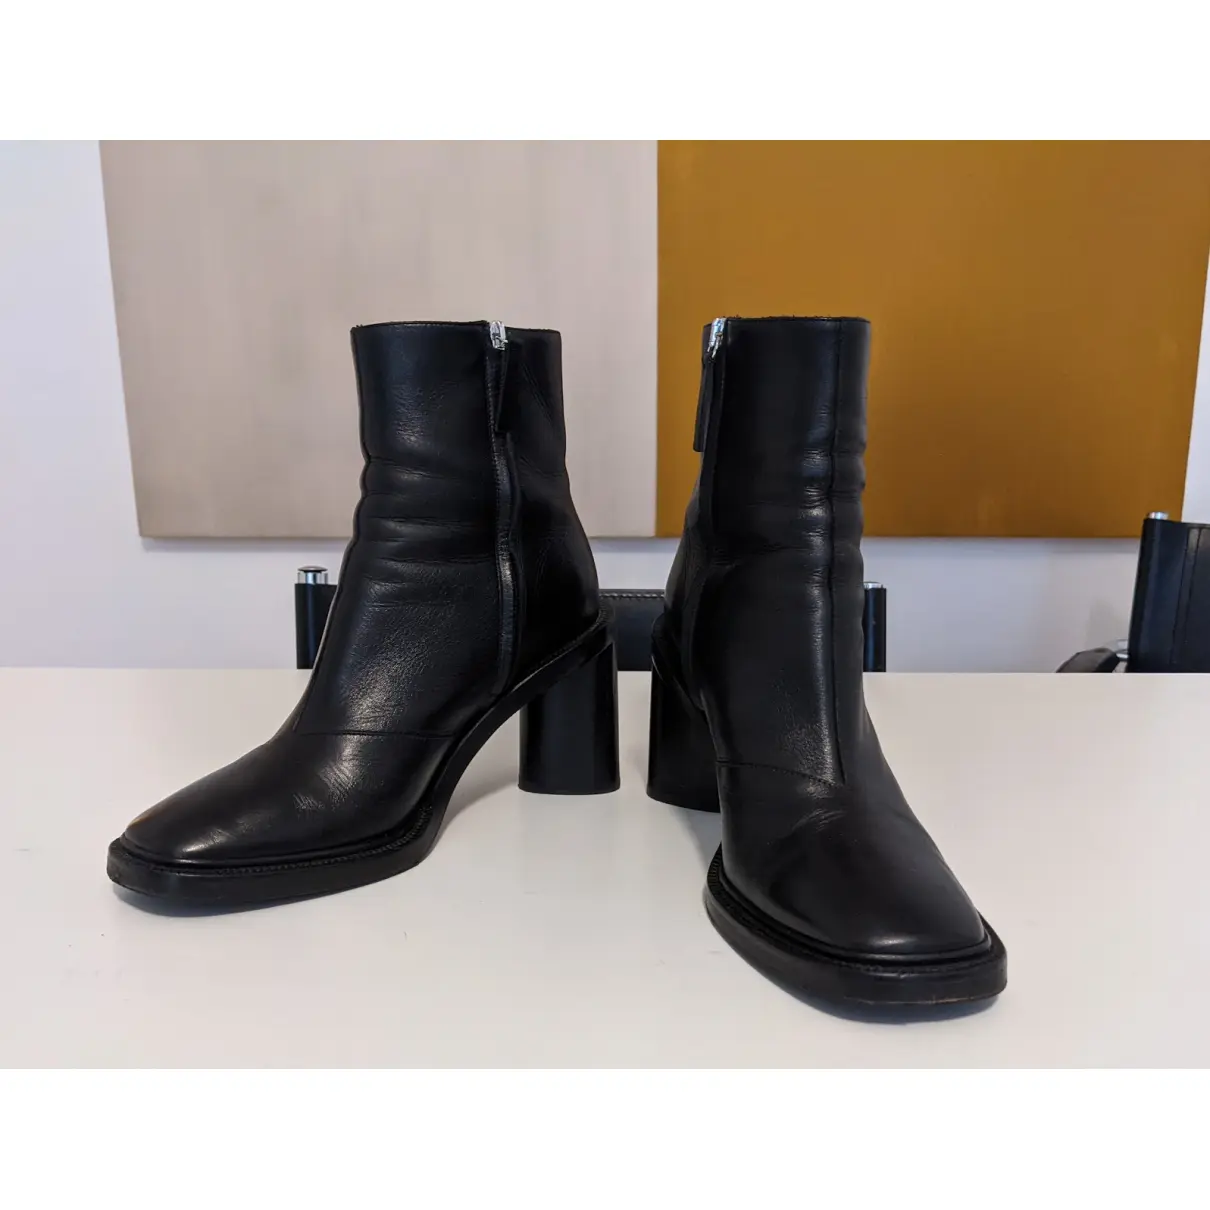 Buy Acne Studios Pistol leather ankle boots online